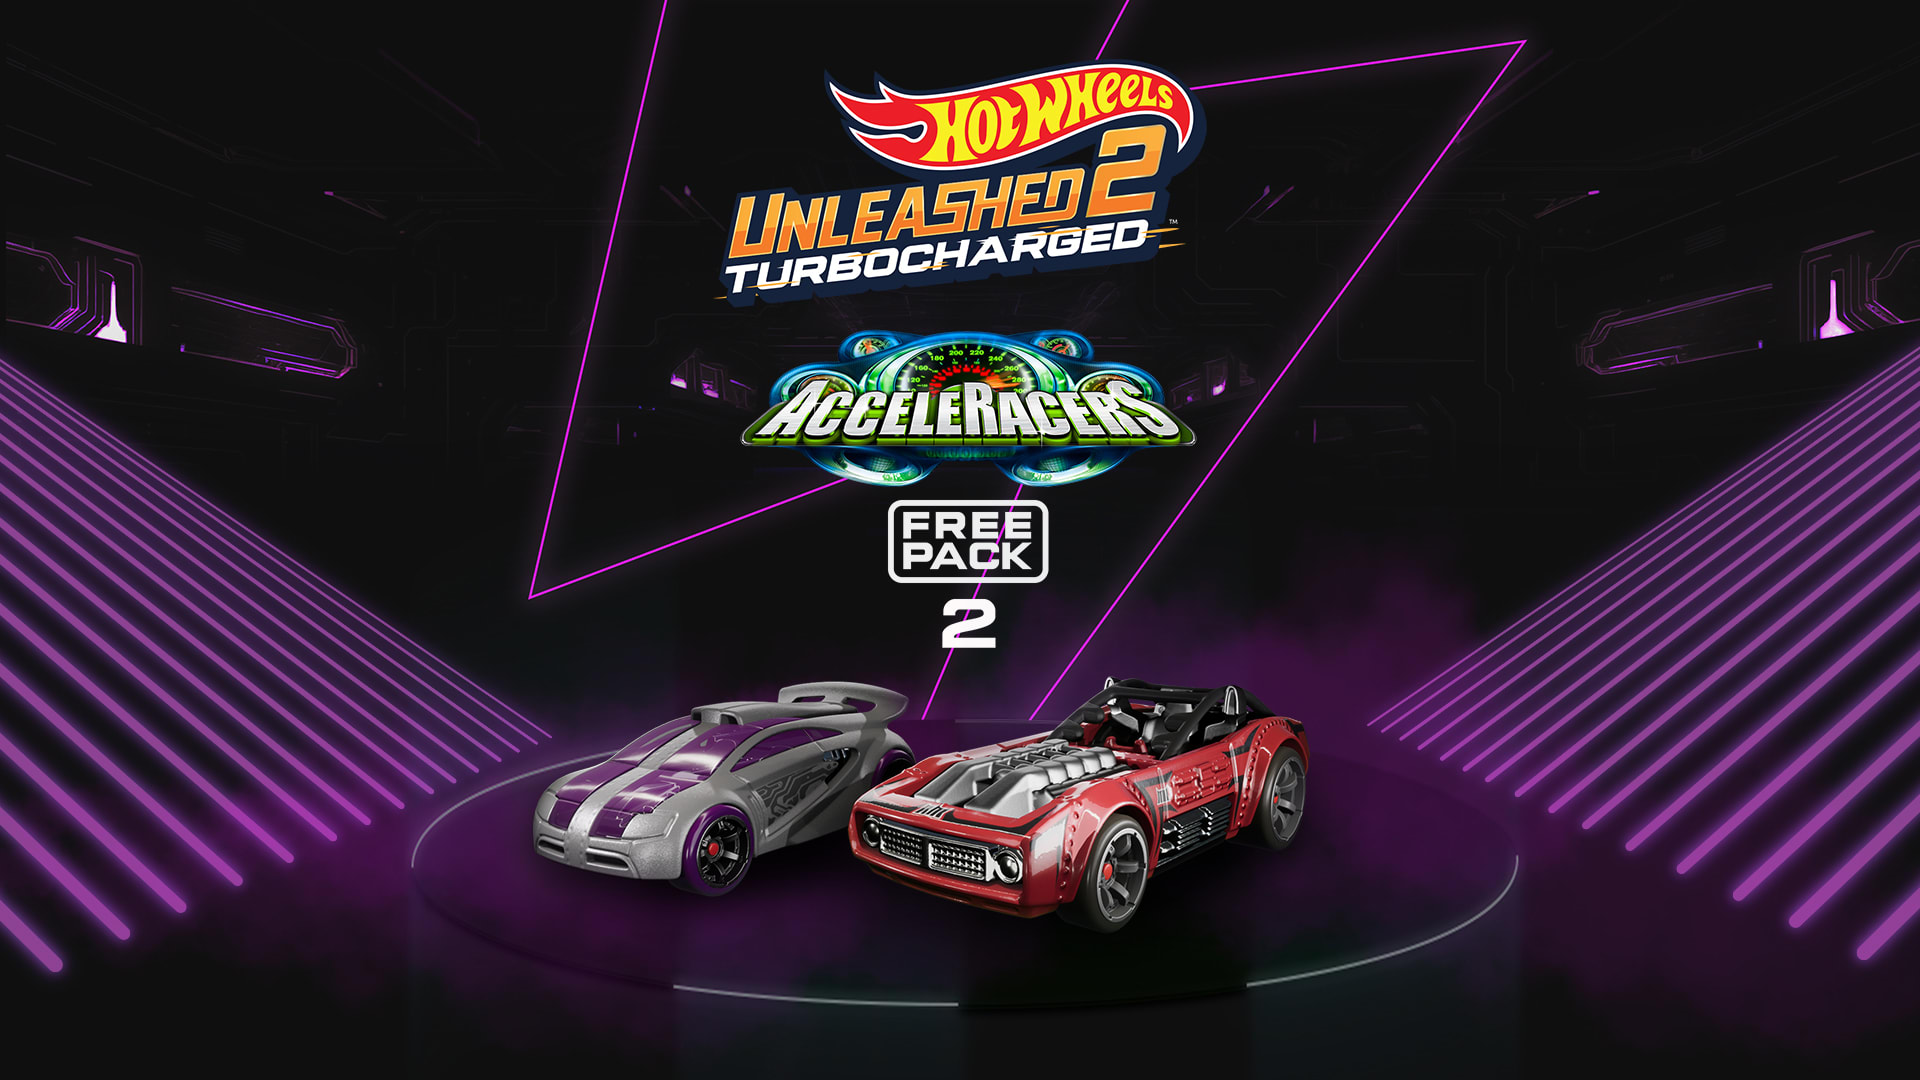 HOT WHEELS UNLEASHED™ 2 - AcceleRacers Free Pack 2 1